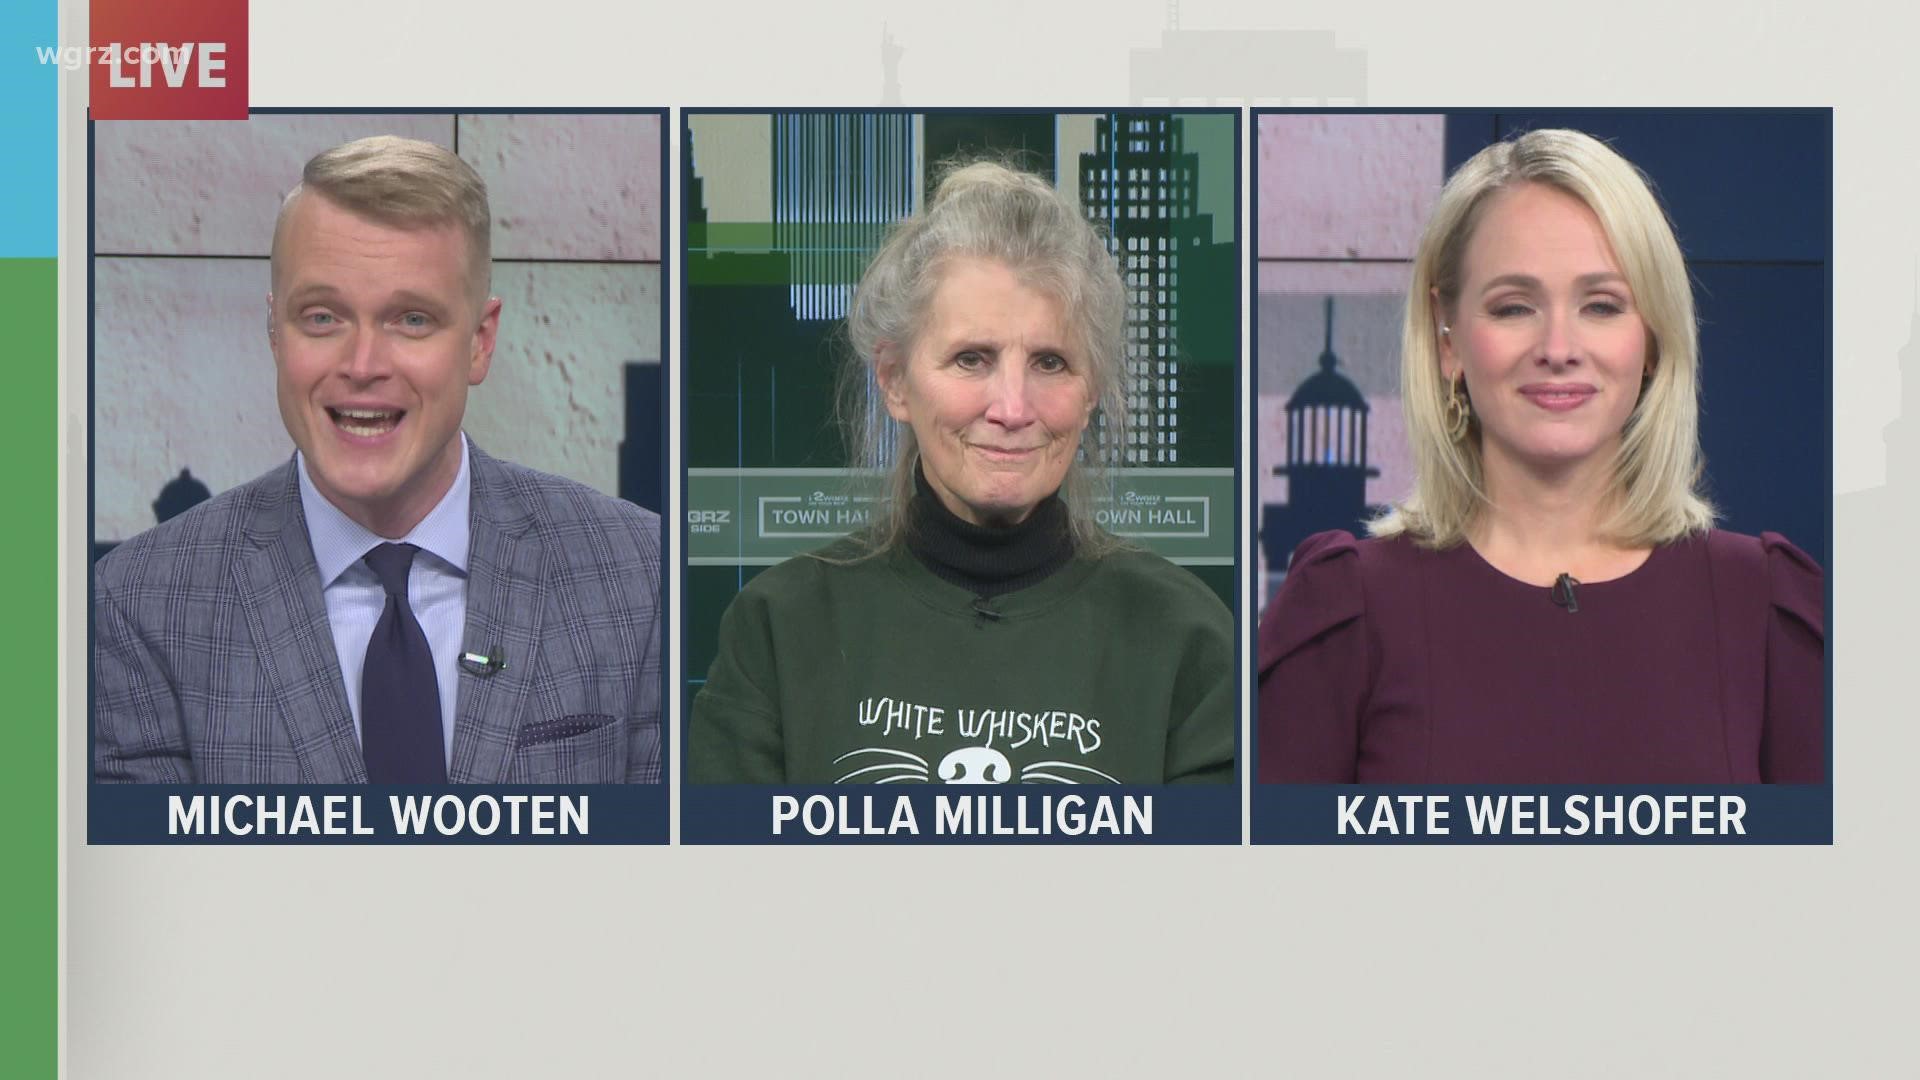 Polla Milligan, founder and president of White Whiskers, joined the Town Hall to discuss the plan for a home for older dogs.